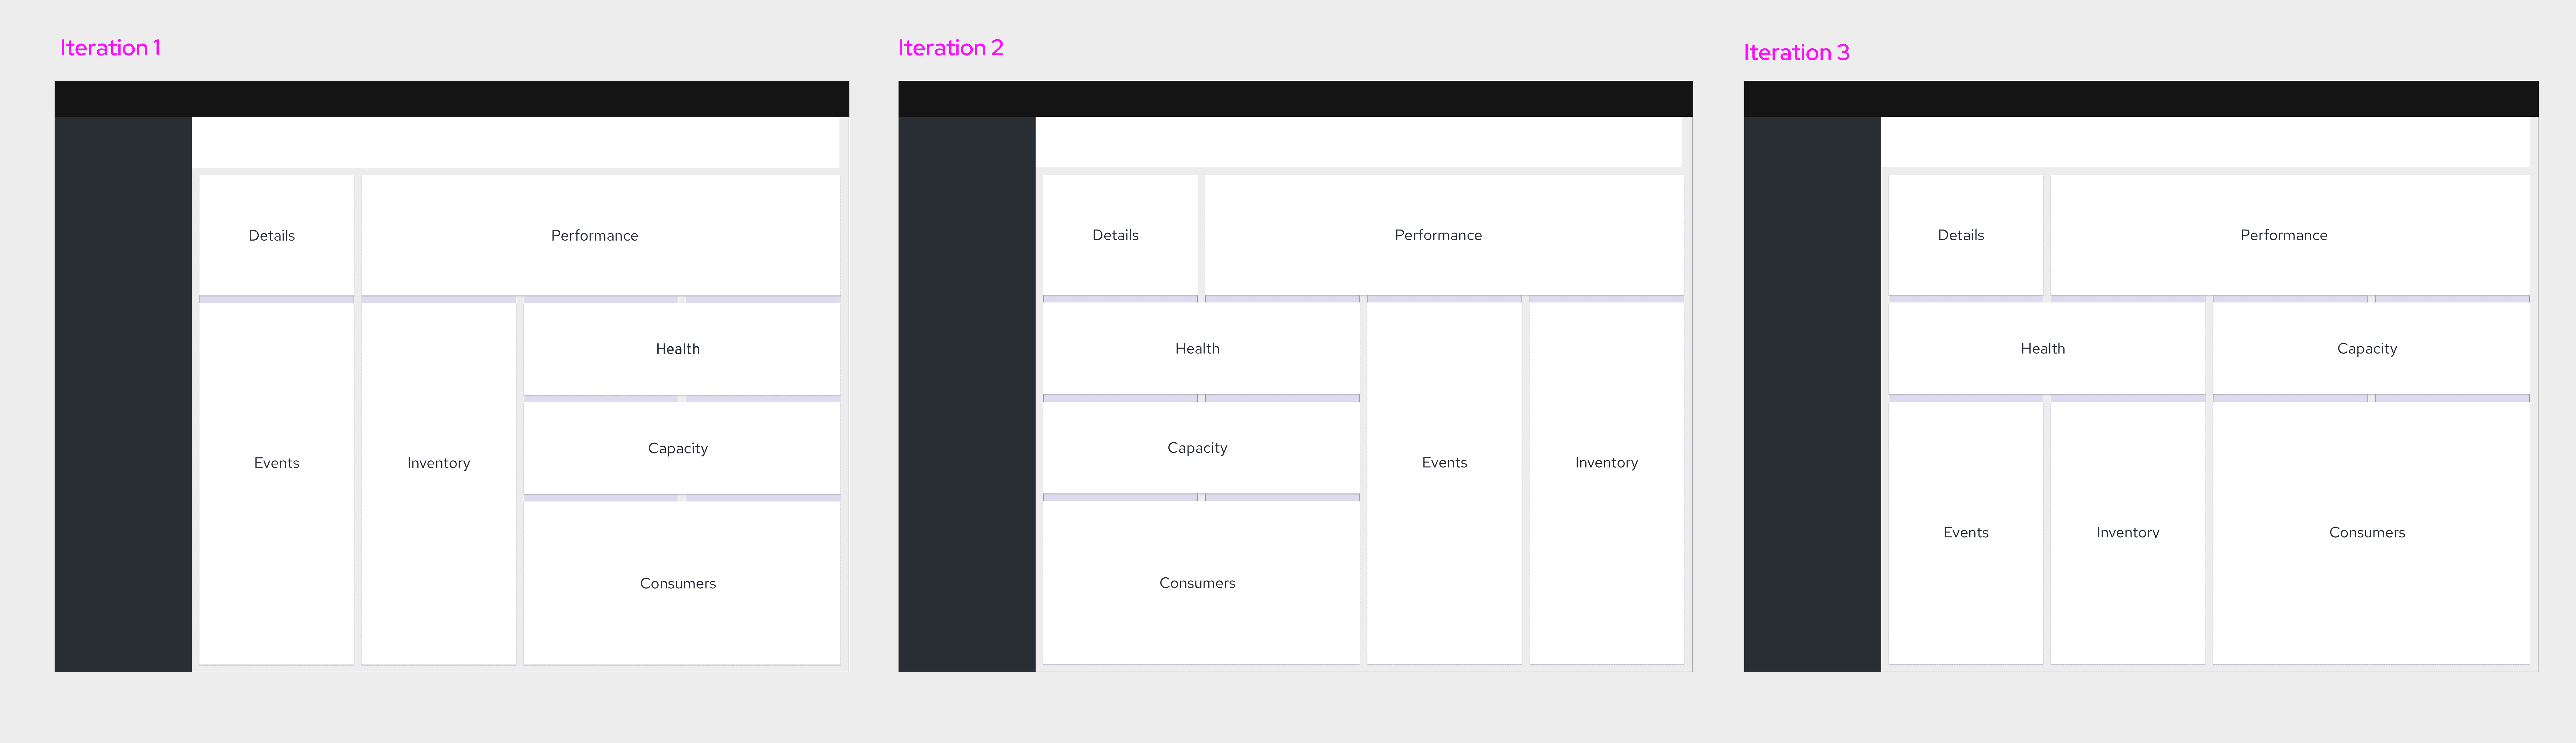 dashboard layout iterations